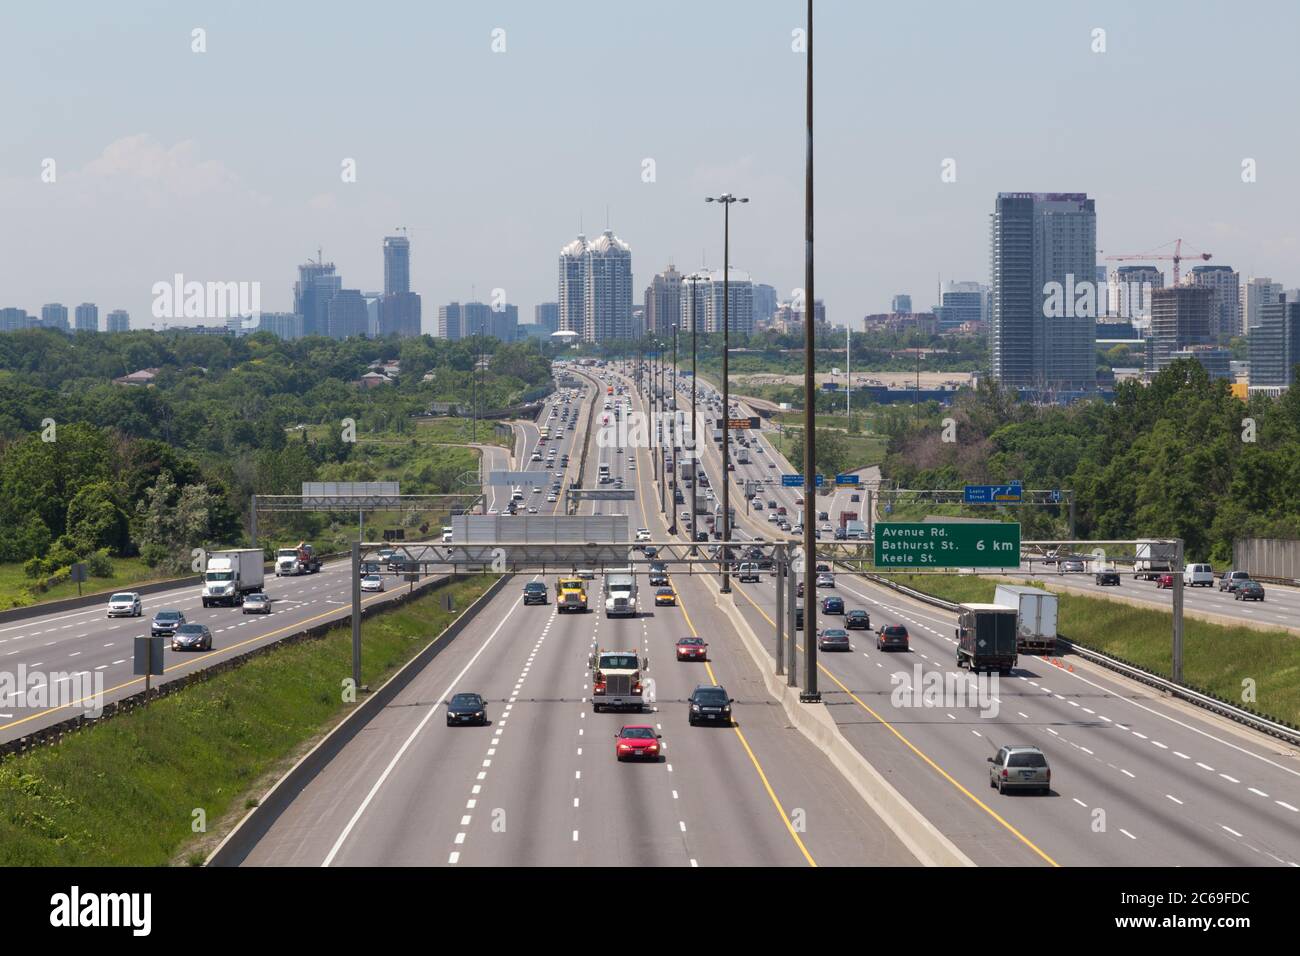 Part of Highway 401 in Toronto during the day showing the blur of traffic on the road Stock Photo